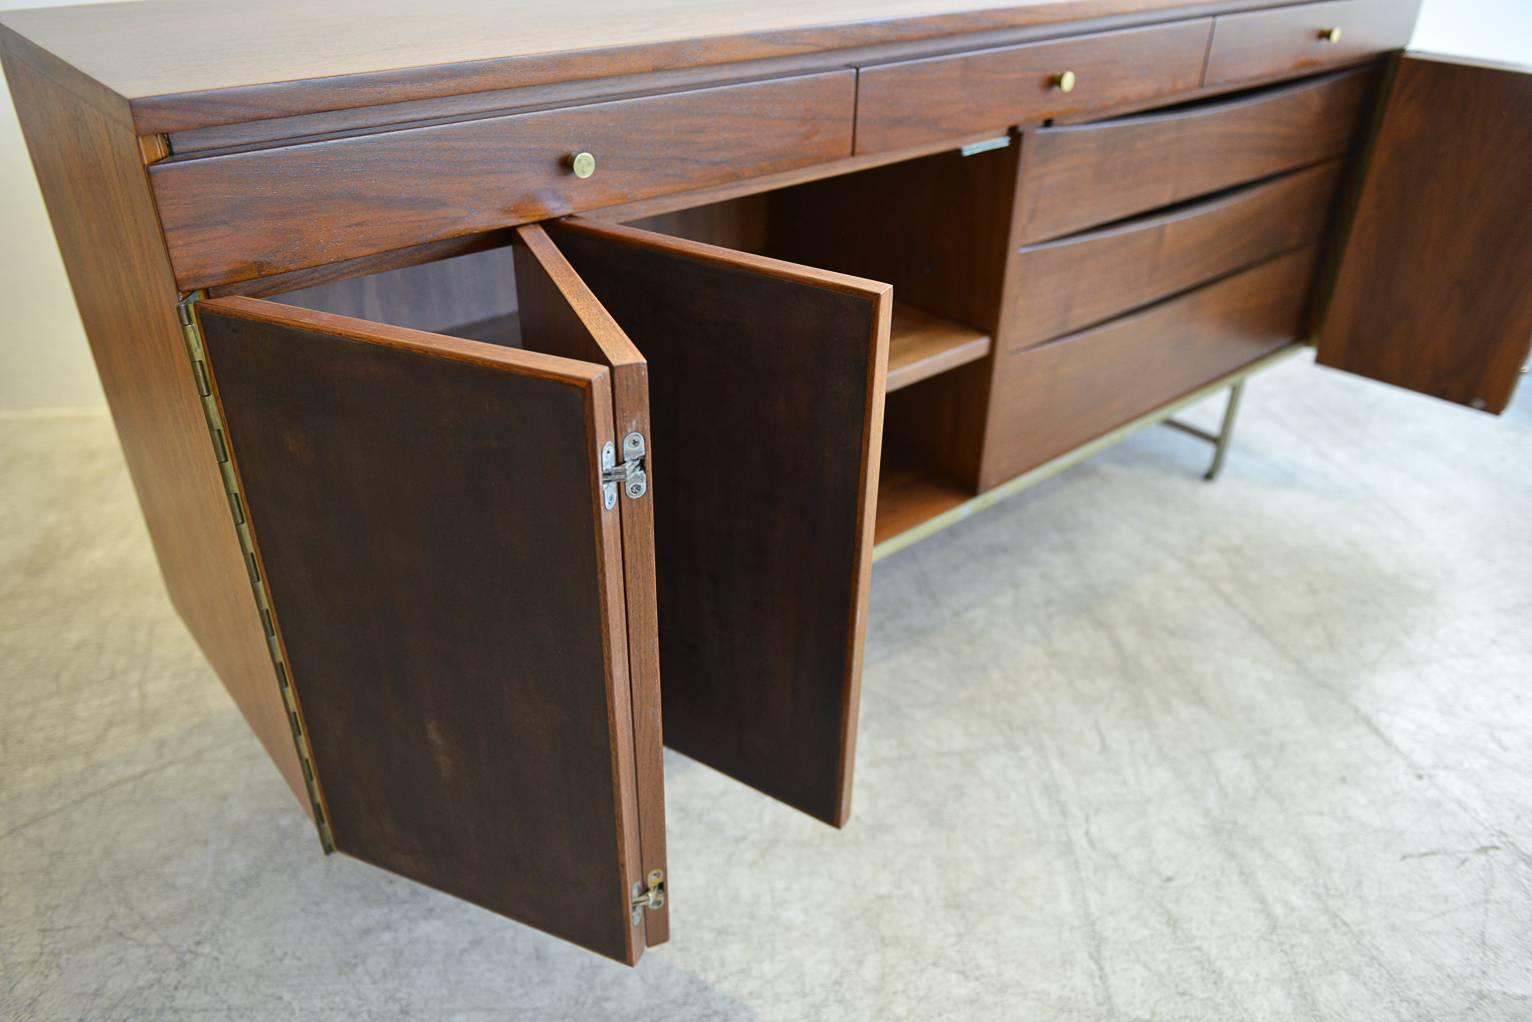 Rare Paul McCobb for Calvin Group walnut and leather front credenza with Classic flat bar brass legs. Accordion trifold doors open to reveal adjustable shelving on left and three drawers on the right. Upper smaller drawers are all felt lined for